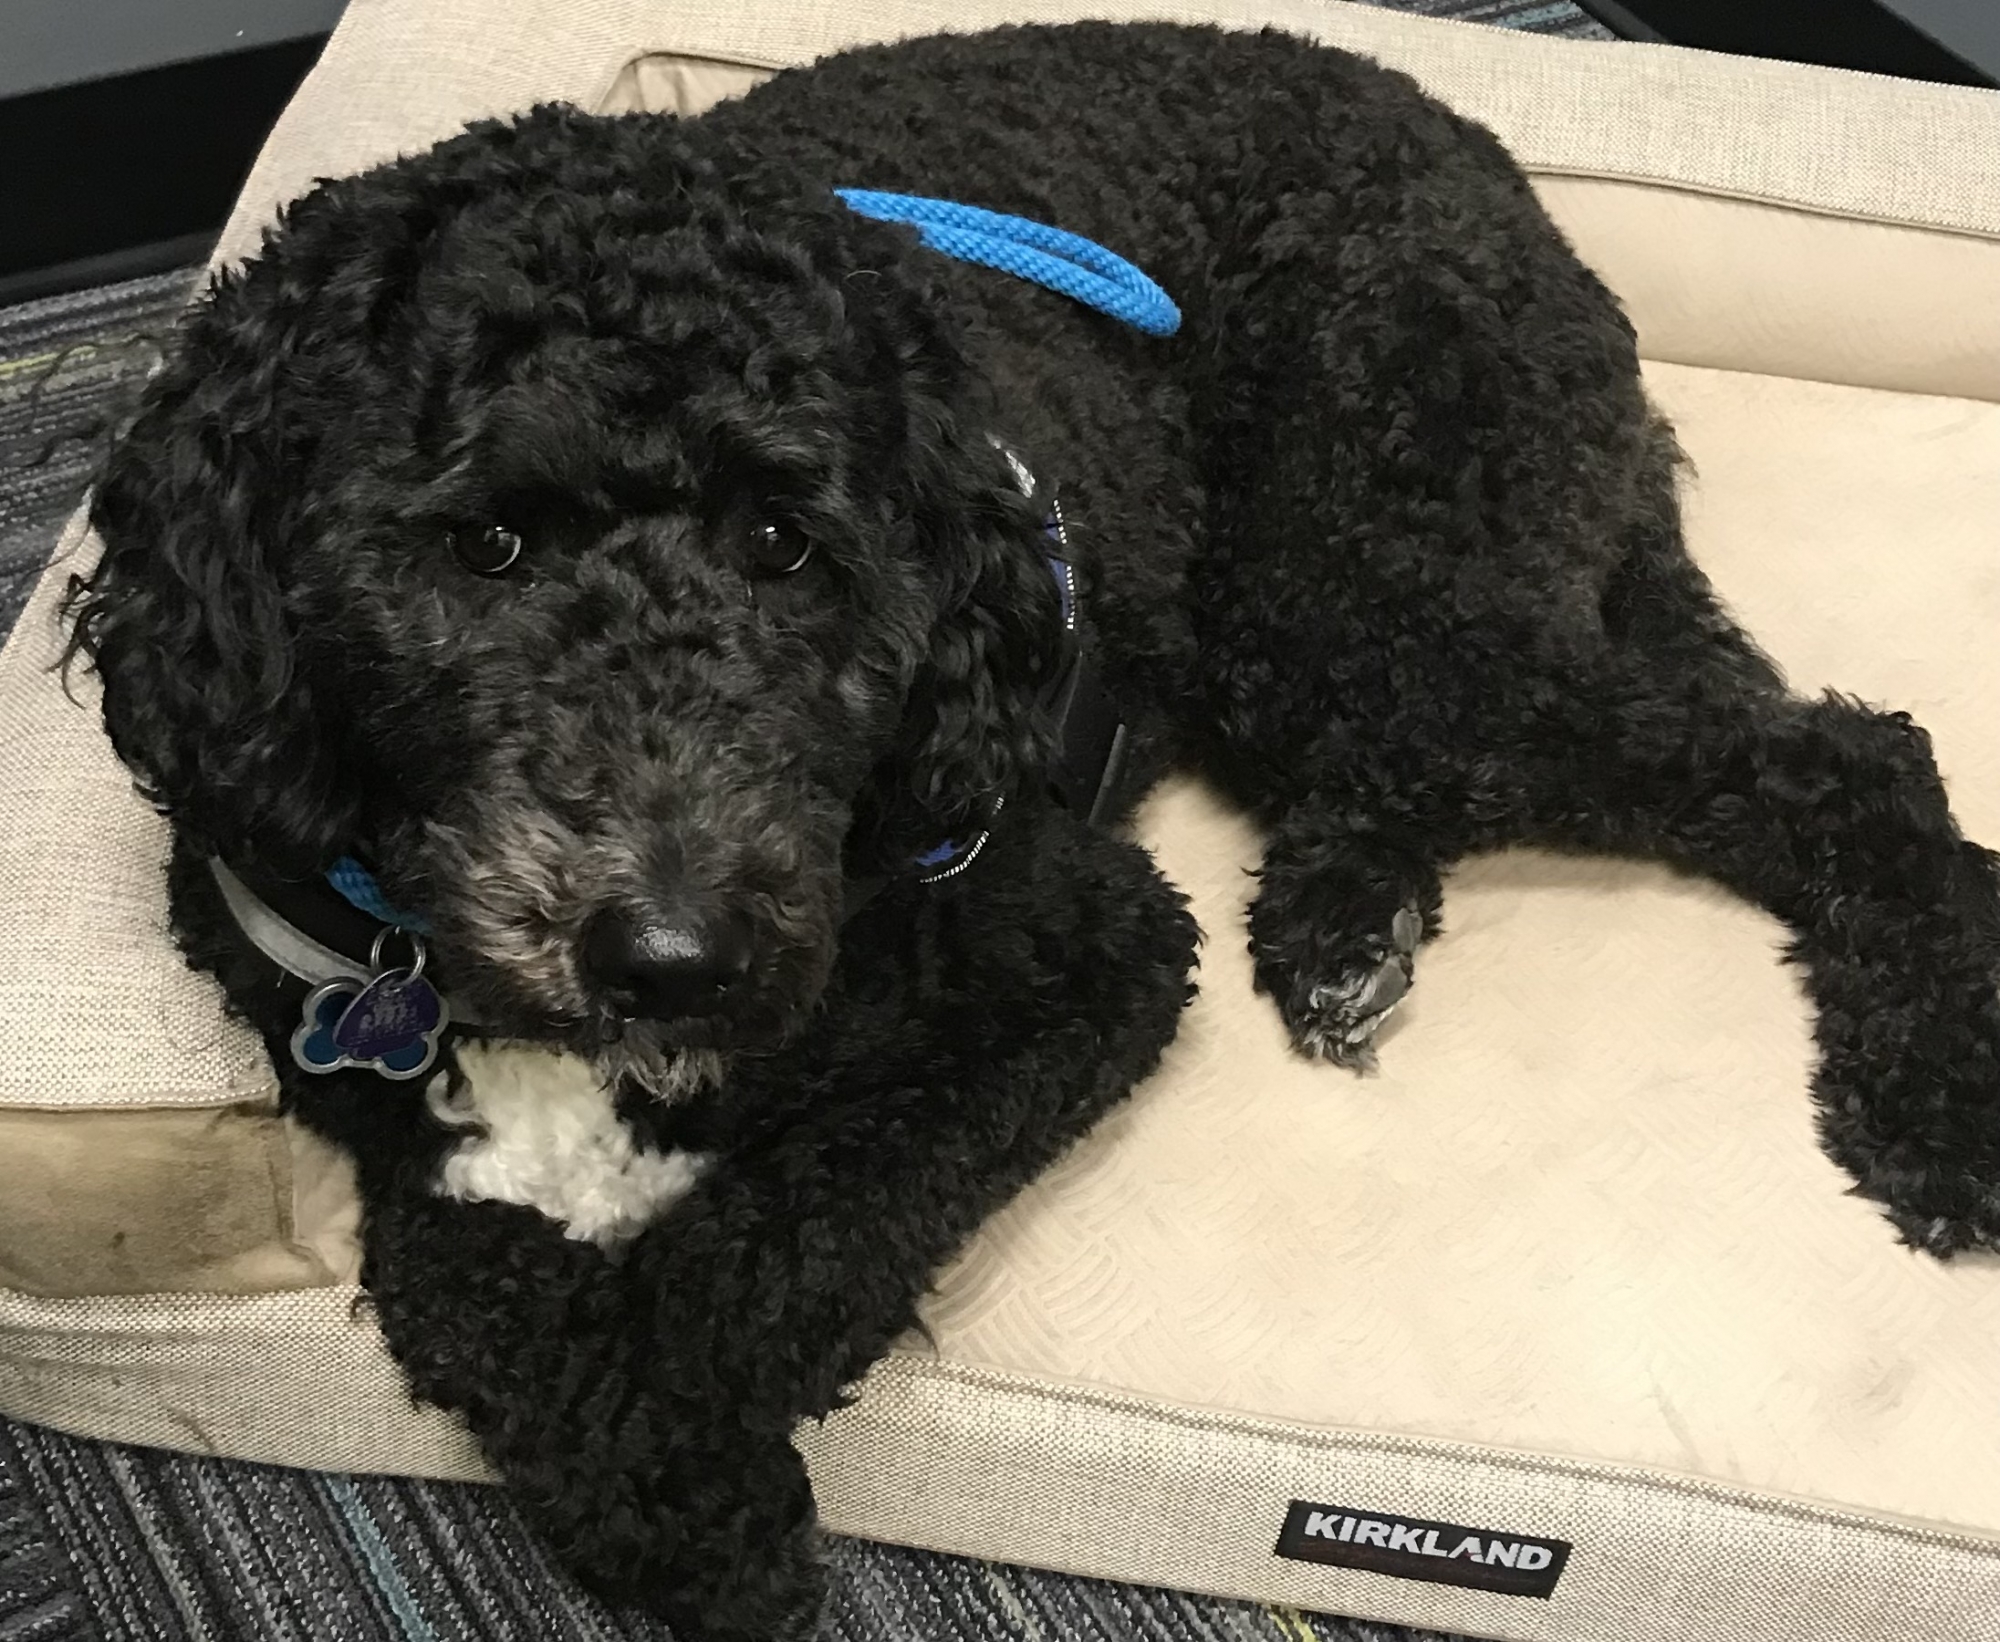 Winnie the therapy dog sitting on a dog bed